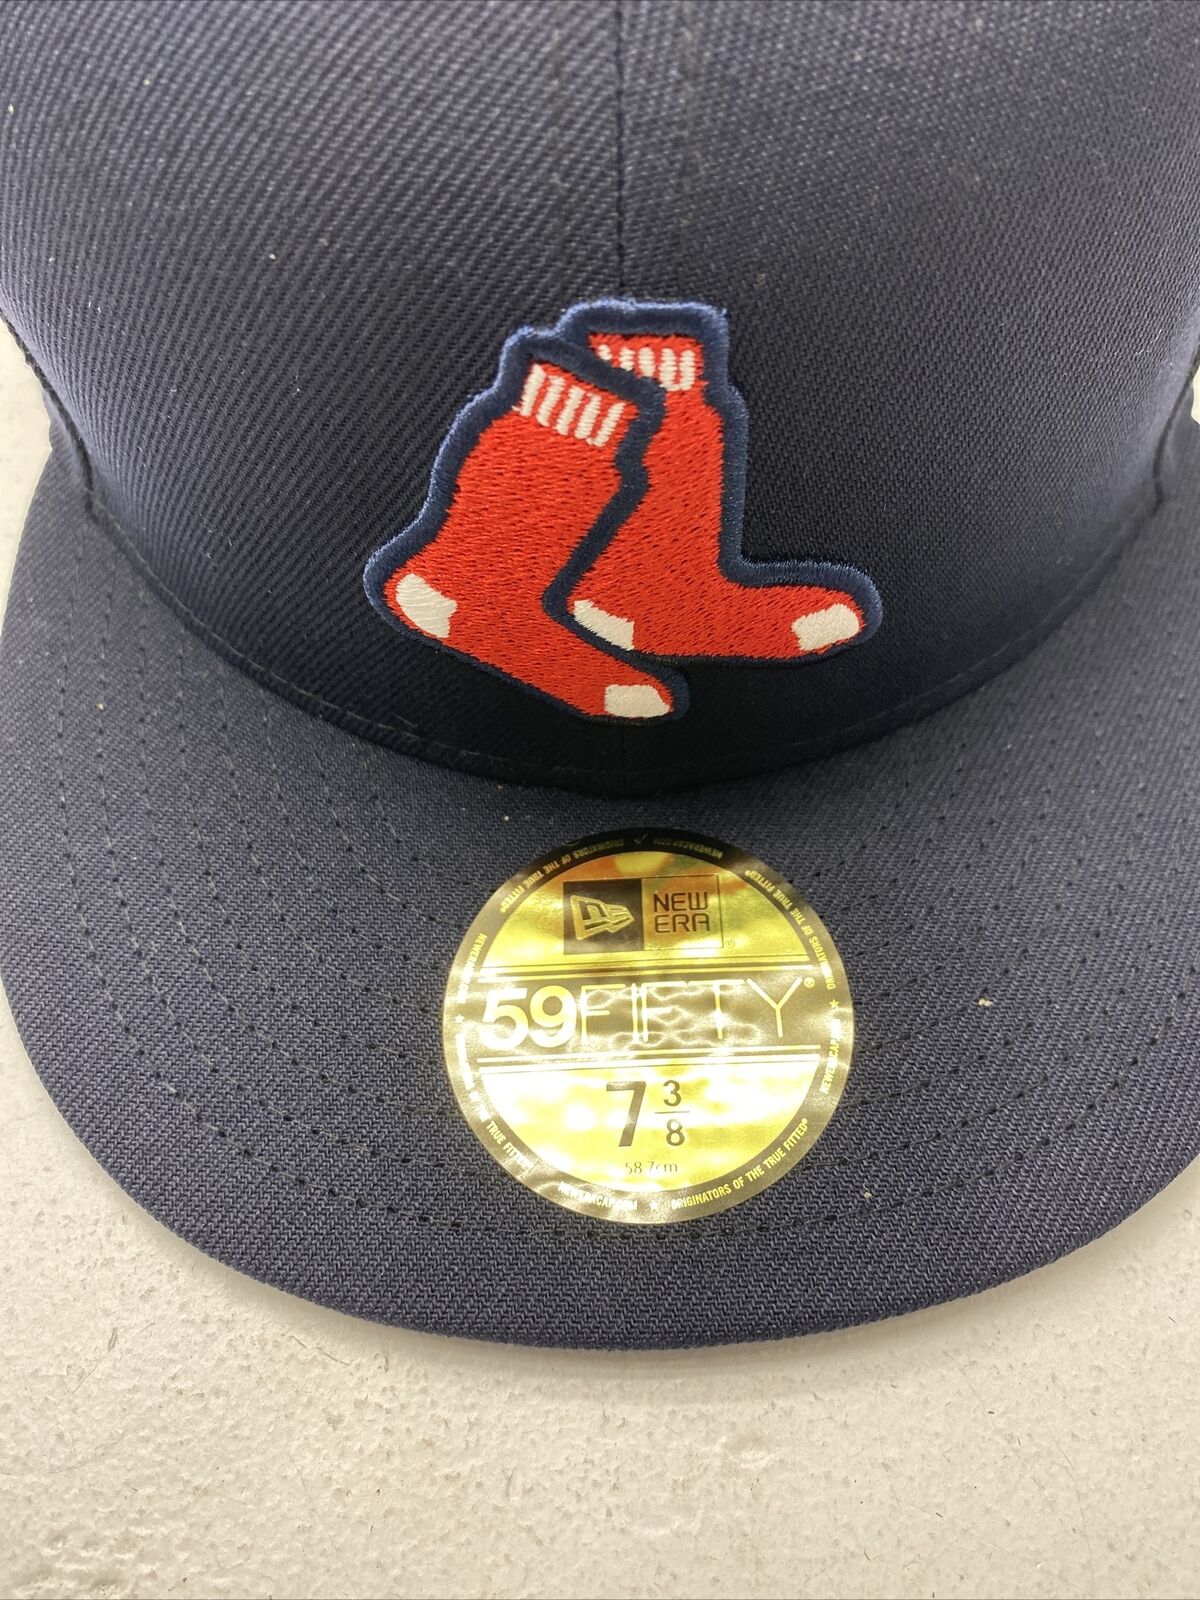 Concepts x New Era 59FIFTY Boston Red Sox Italy Flag Fitted Hat (Navy) 7 3/8